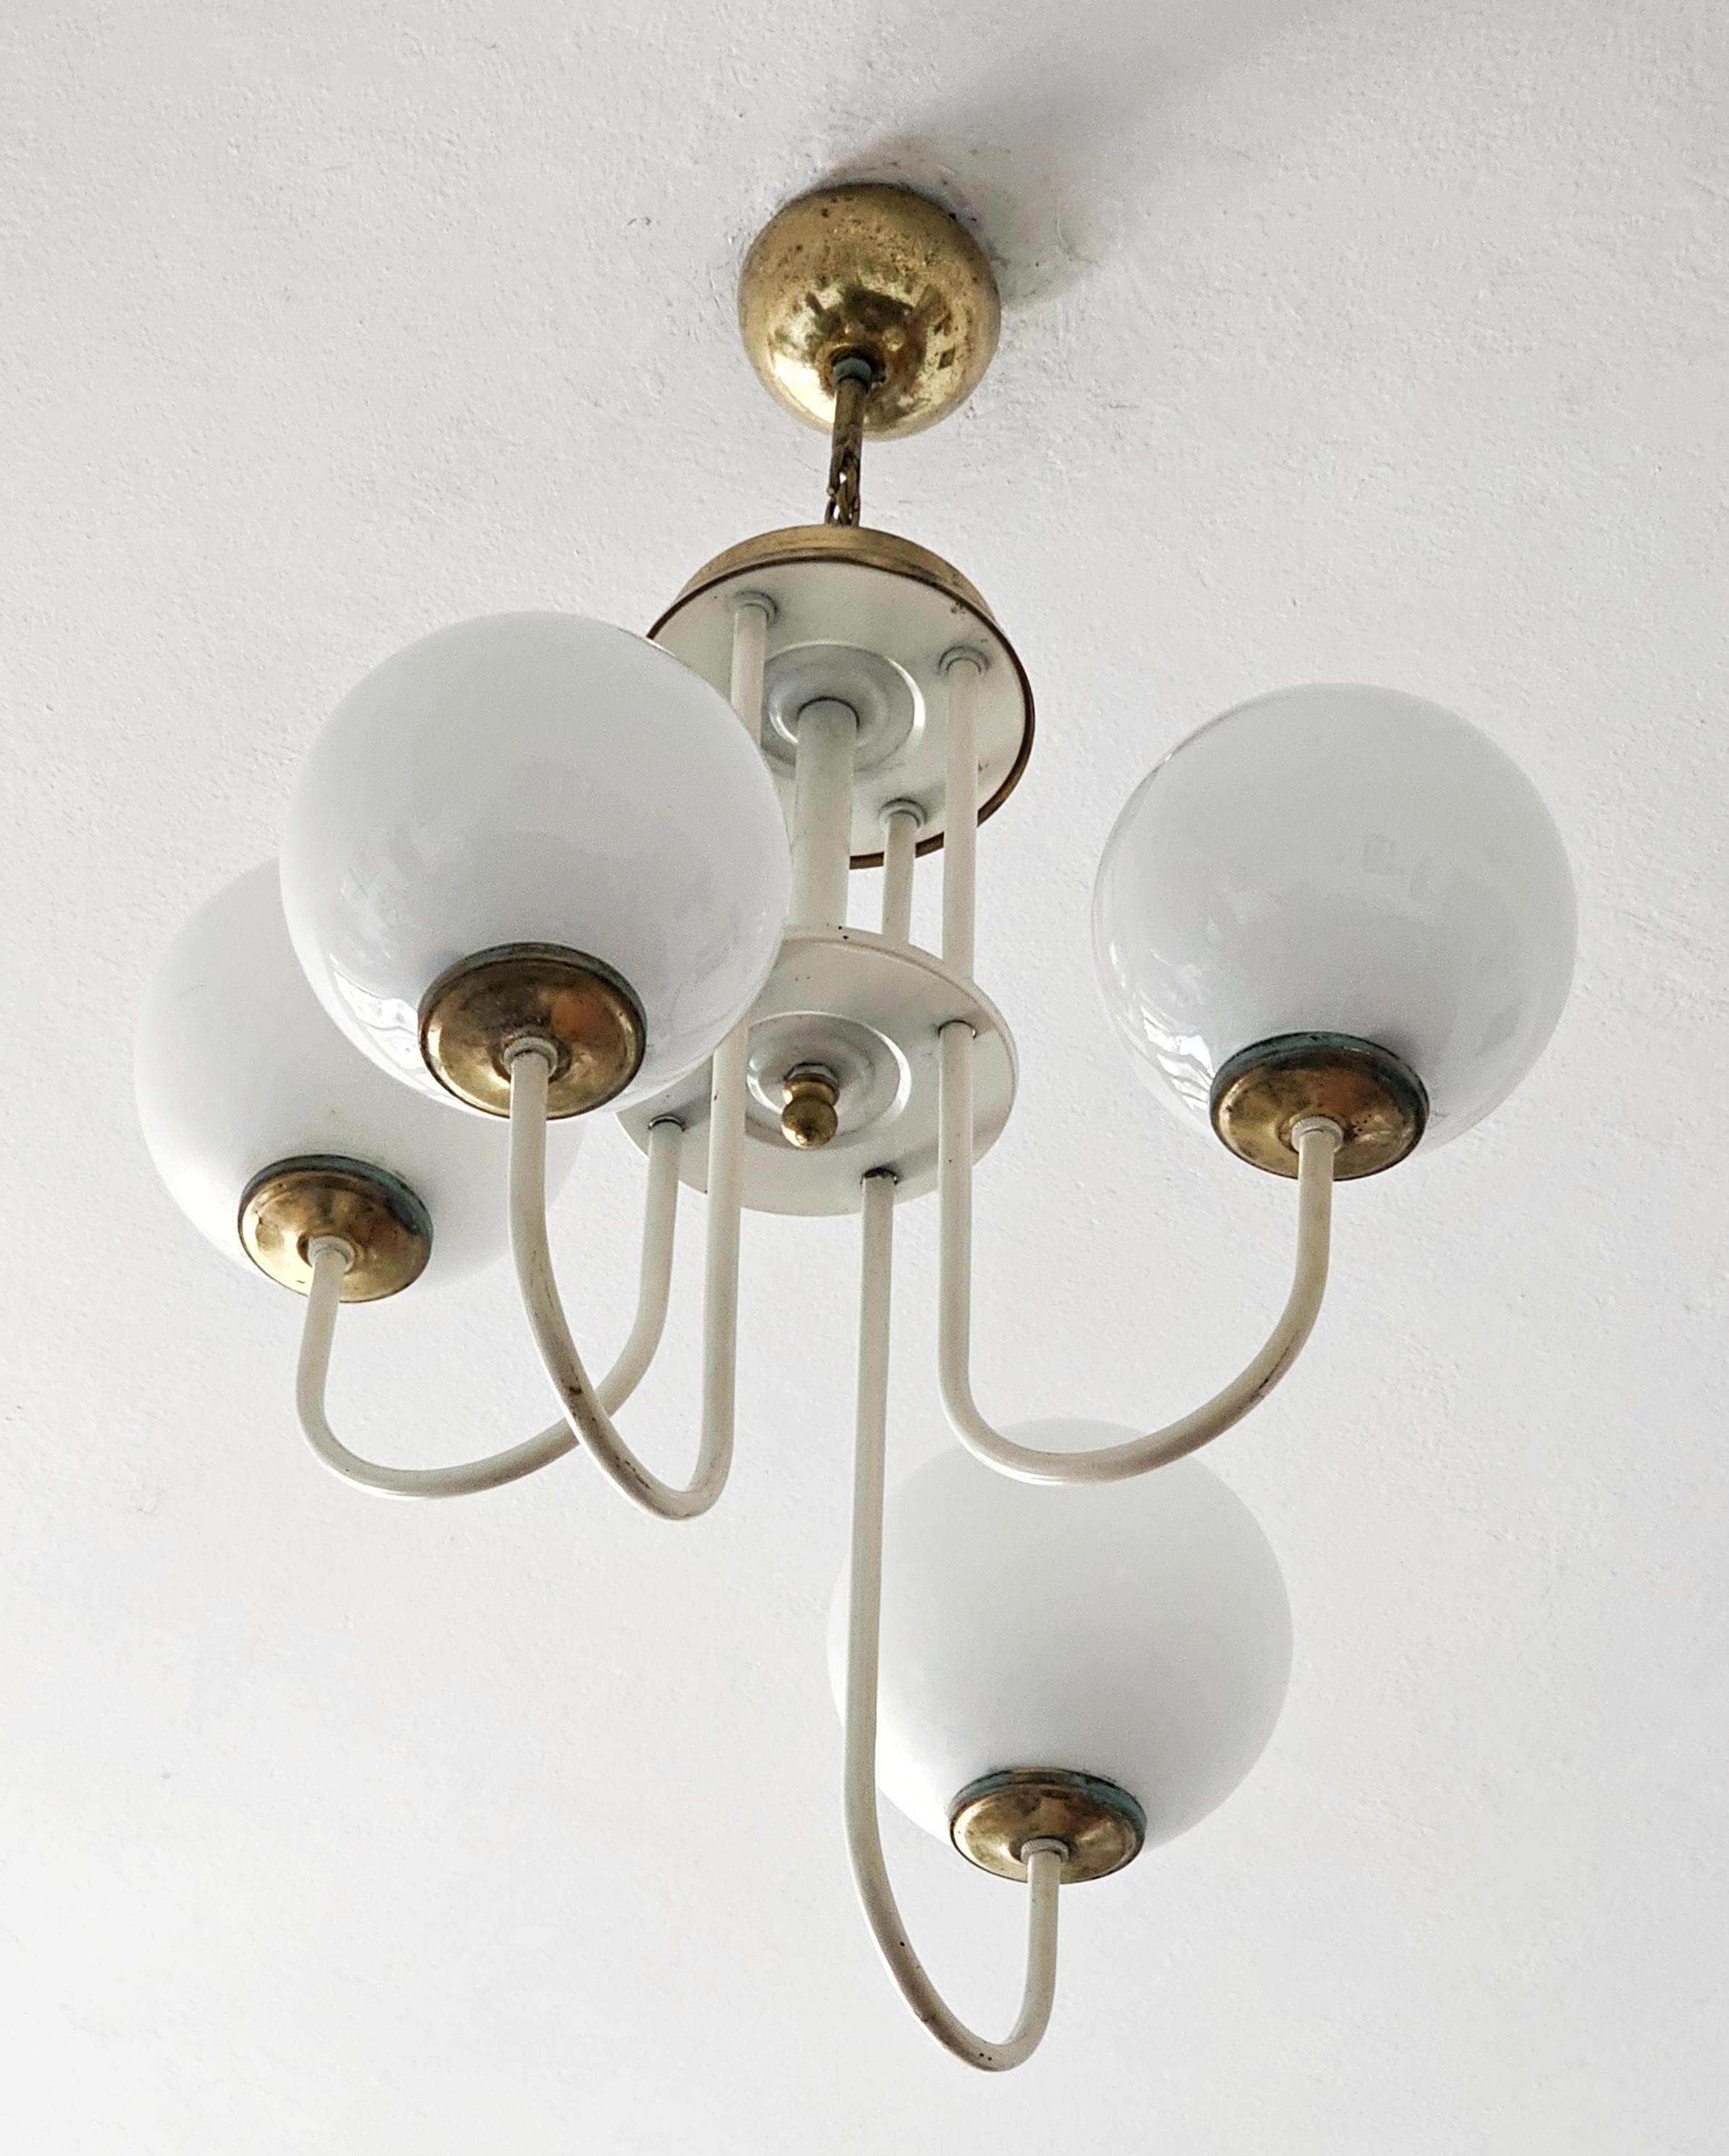 Rare Mid Century Modern Chandelier with Opaline Glass Balls, Italy 1960s For Sale 1